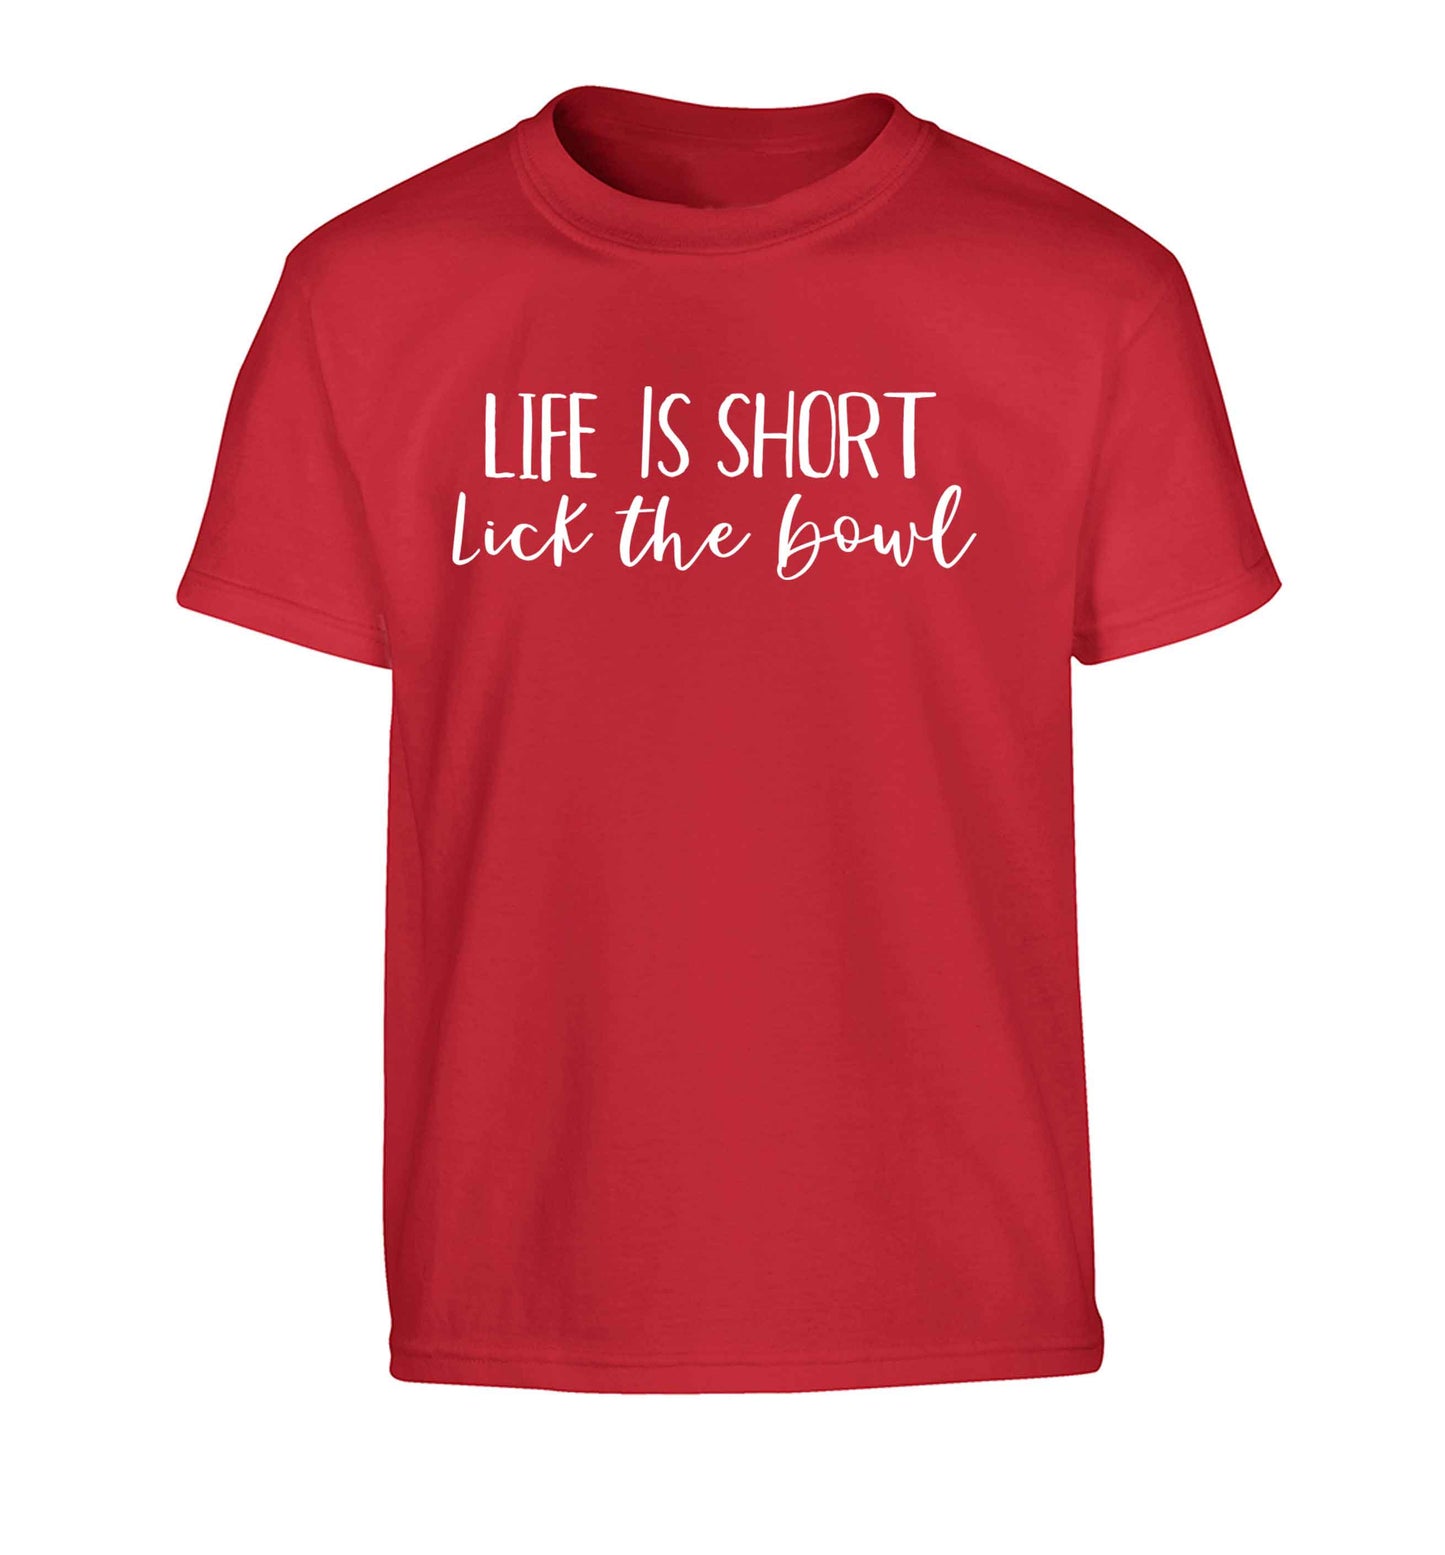 Life is short lick the bowl Children's red Tshirt 12-13 Years